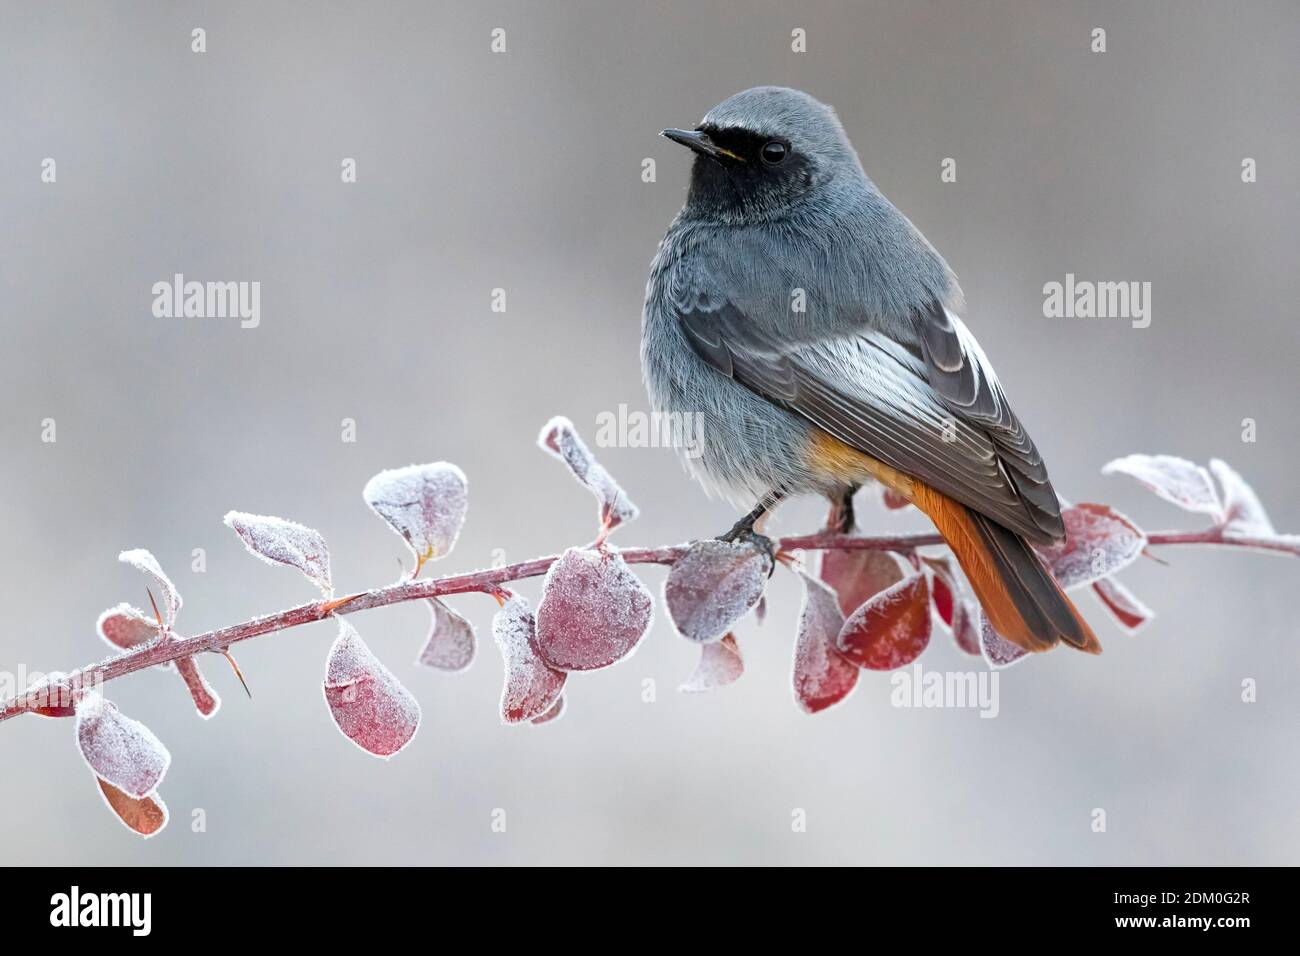 Male Black redstart perched on a frost covered twig with reddish colored leaves. Stock Photo